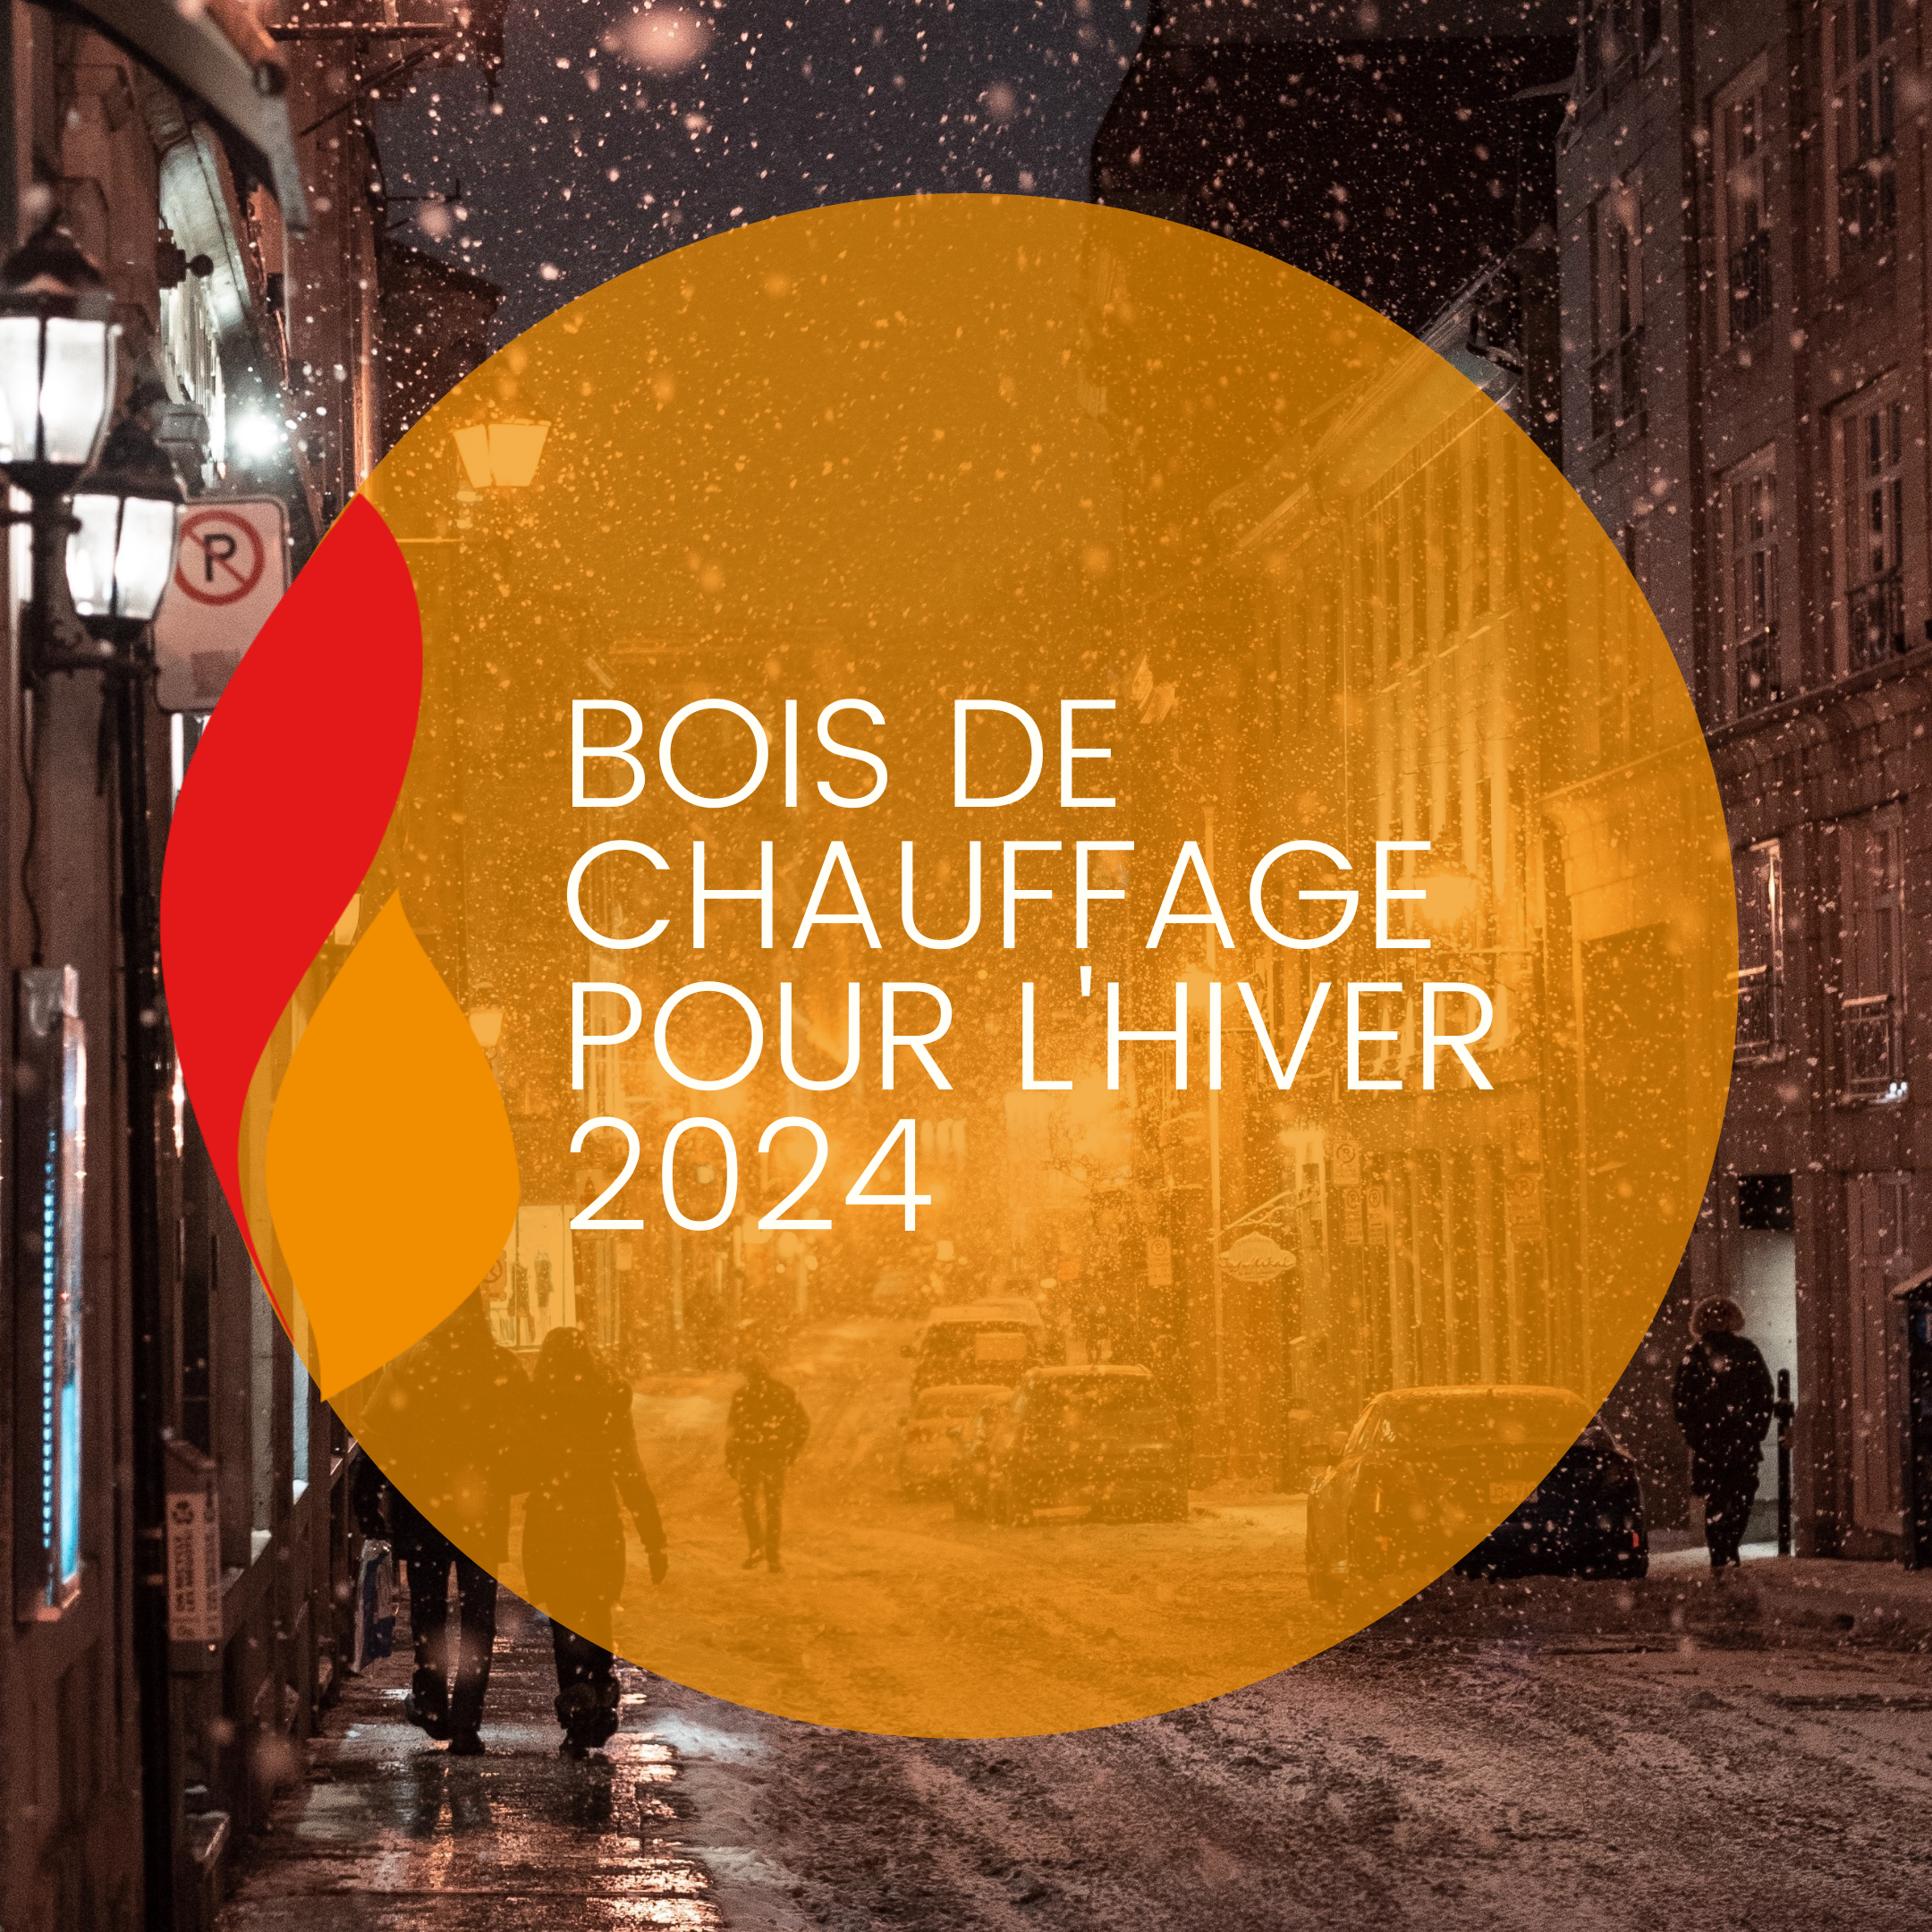 You are currently viewing Bois de chauffage pour l’hiver 2024